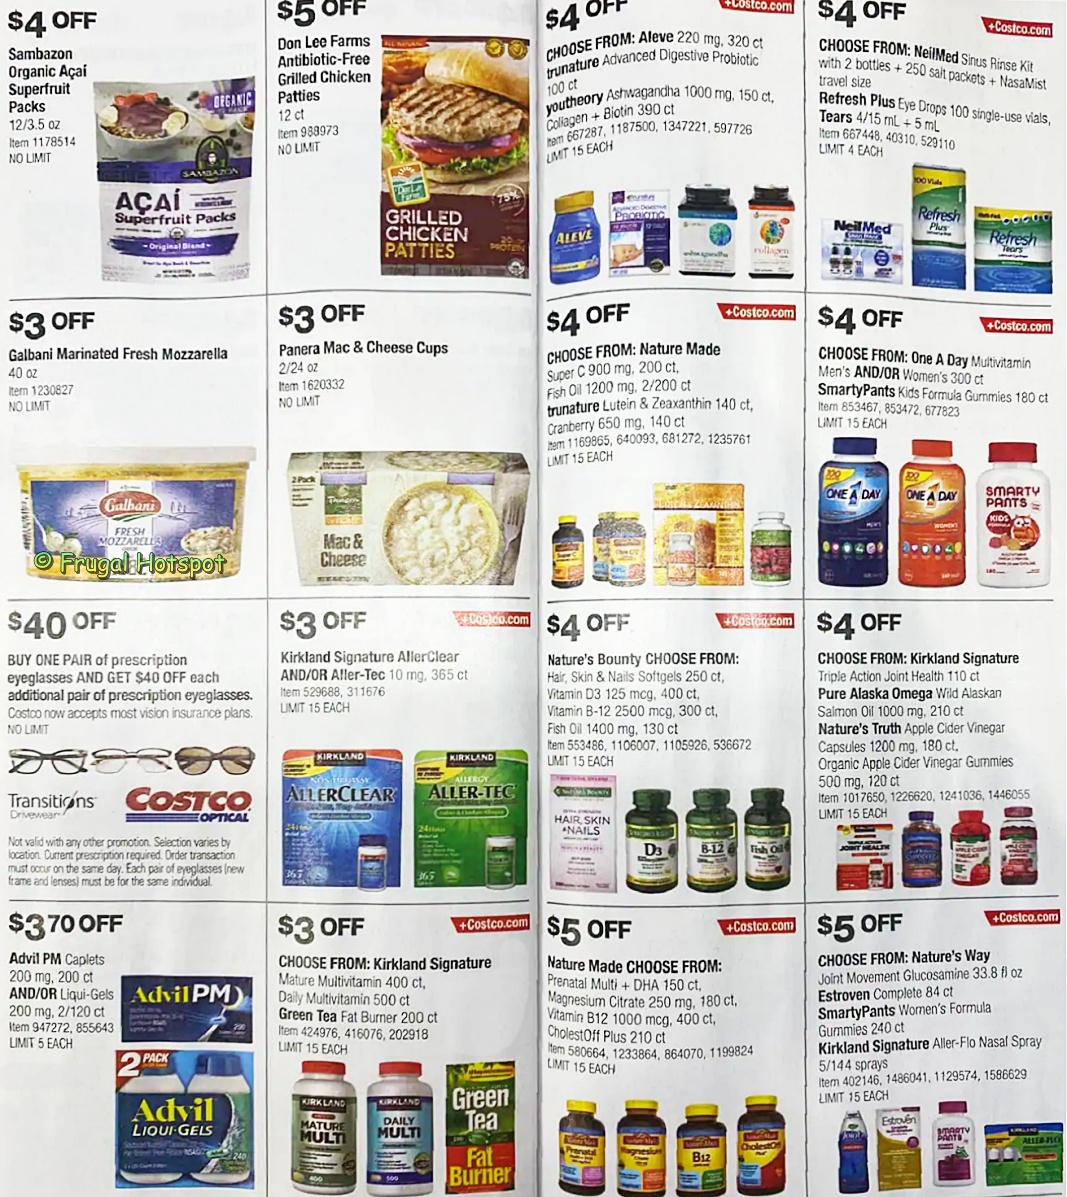 Costco Coupon Book APRIL 2022 | P 19 and 20